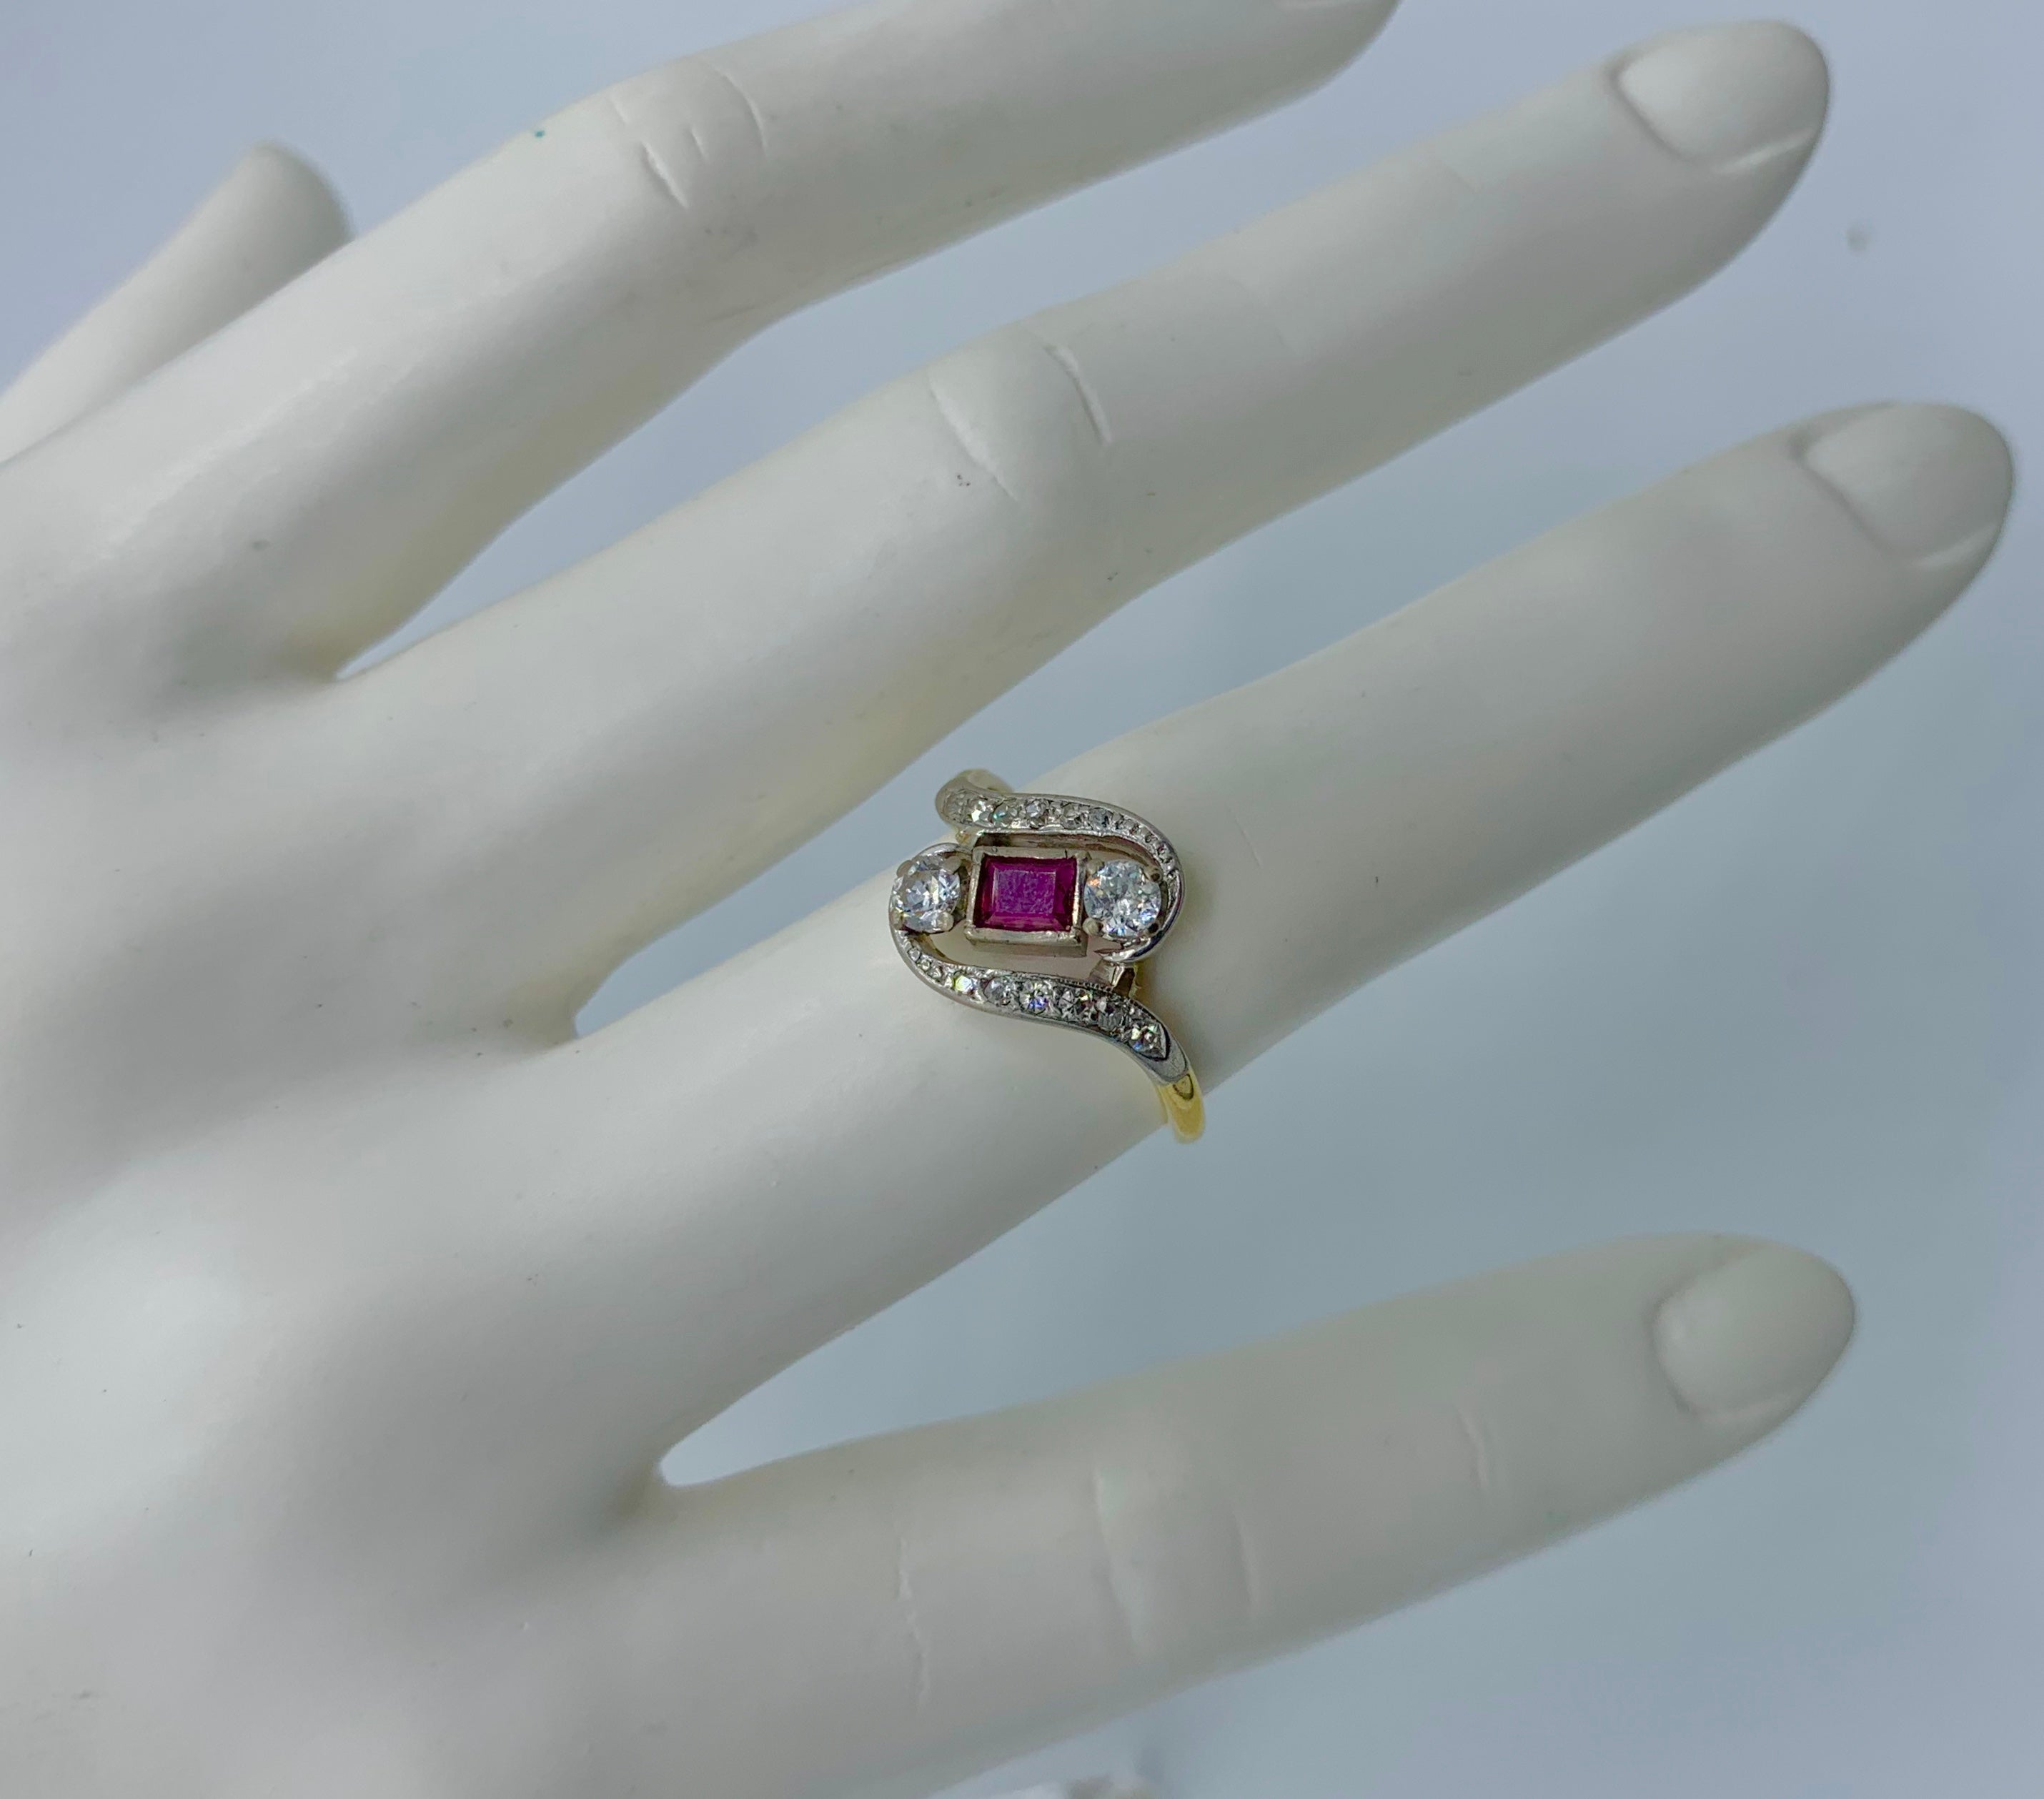 This is an Antique Victorian - Art Deco Ring with a gorgeous natural emerald cut Ruby and Diamonds of stunning beauty. The open work swirling design of the period Art Deco ring is absolutely wonderful and is very rare.  The color of the Ruby is the